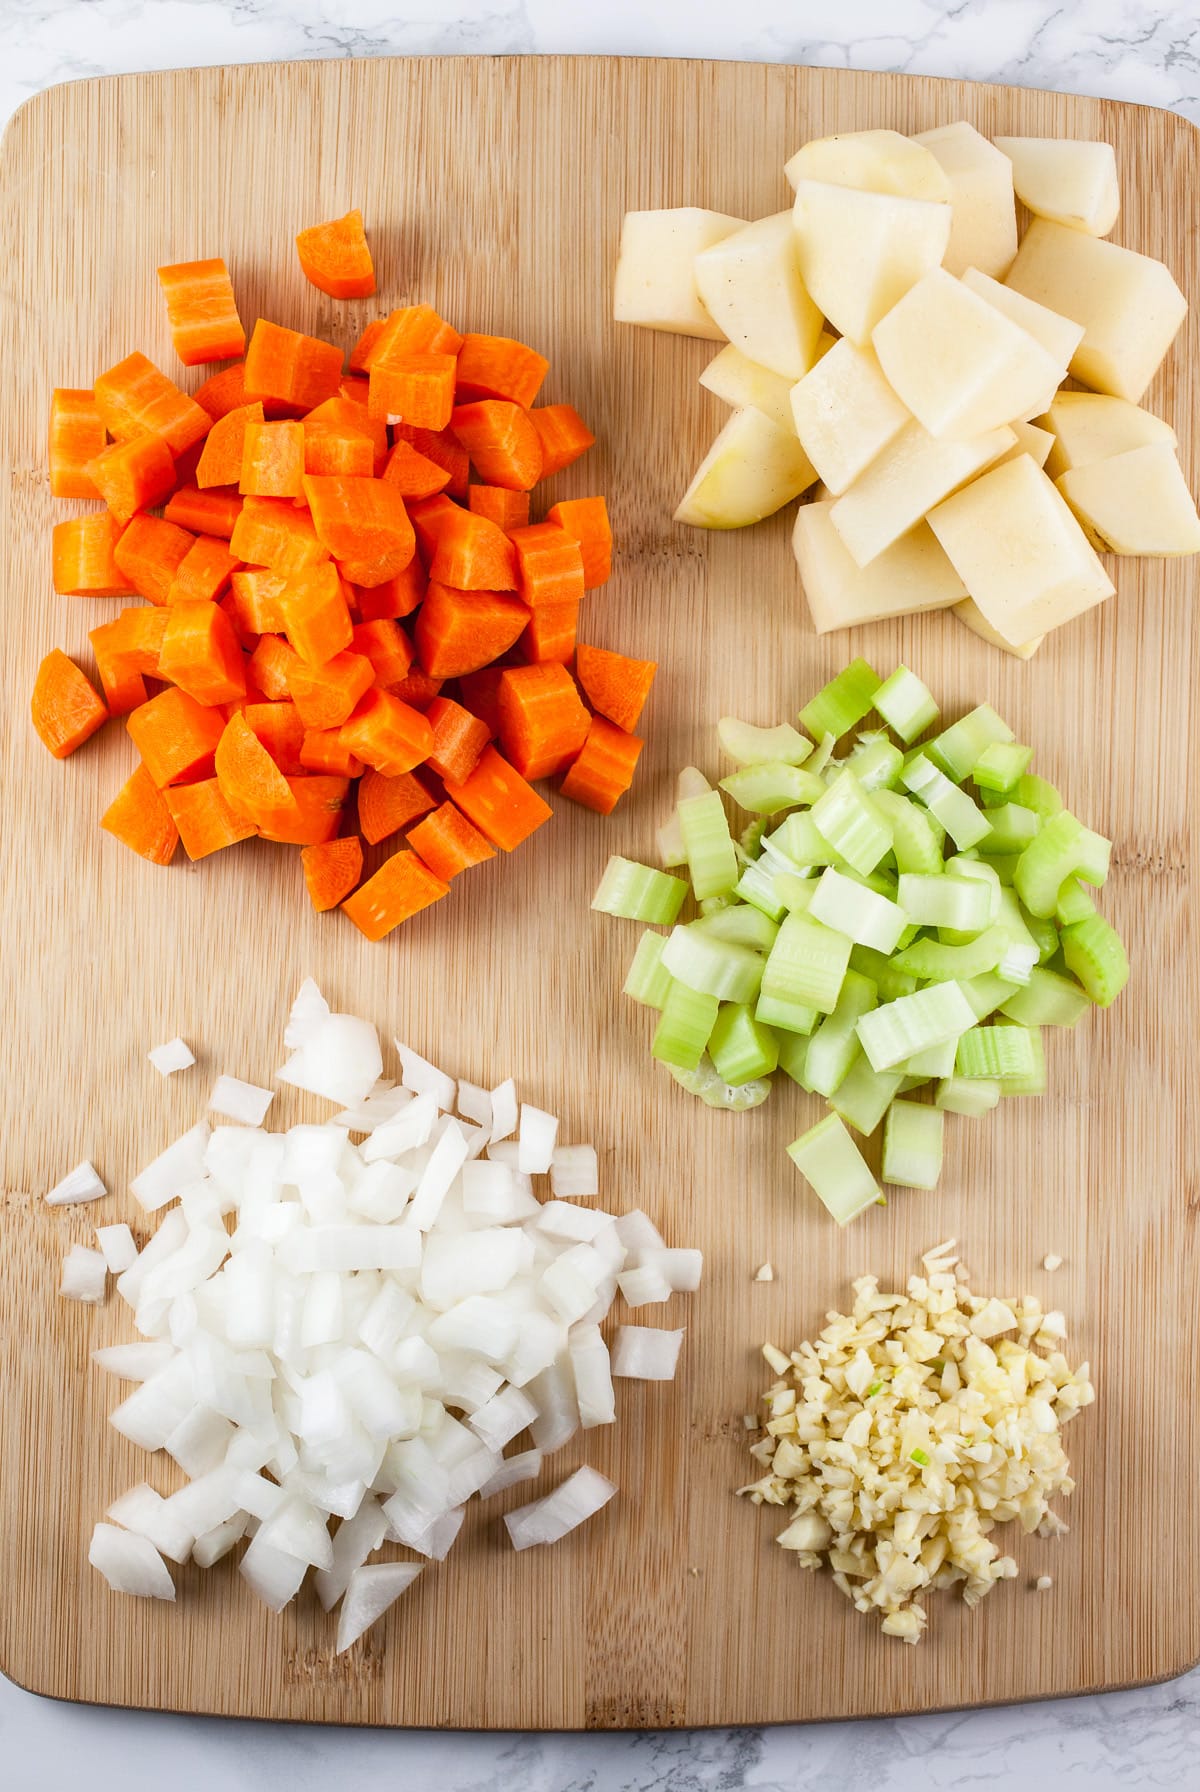 Minced garlic, onions, celery, and chopped carrots and potatoes on wooden cutting board.